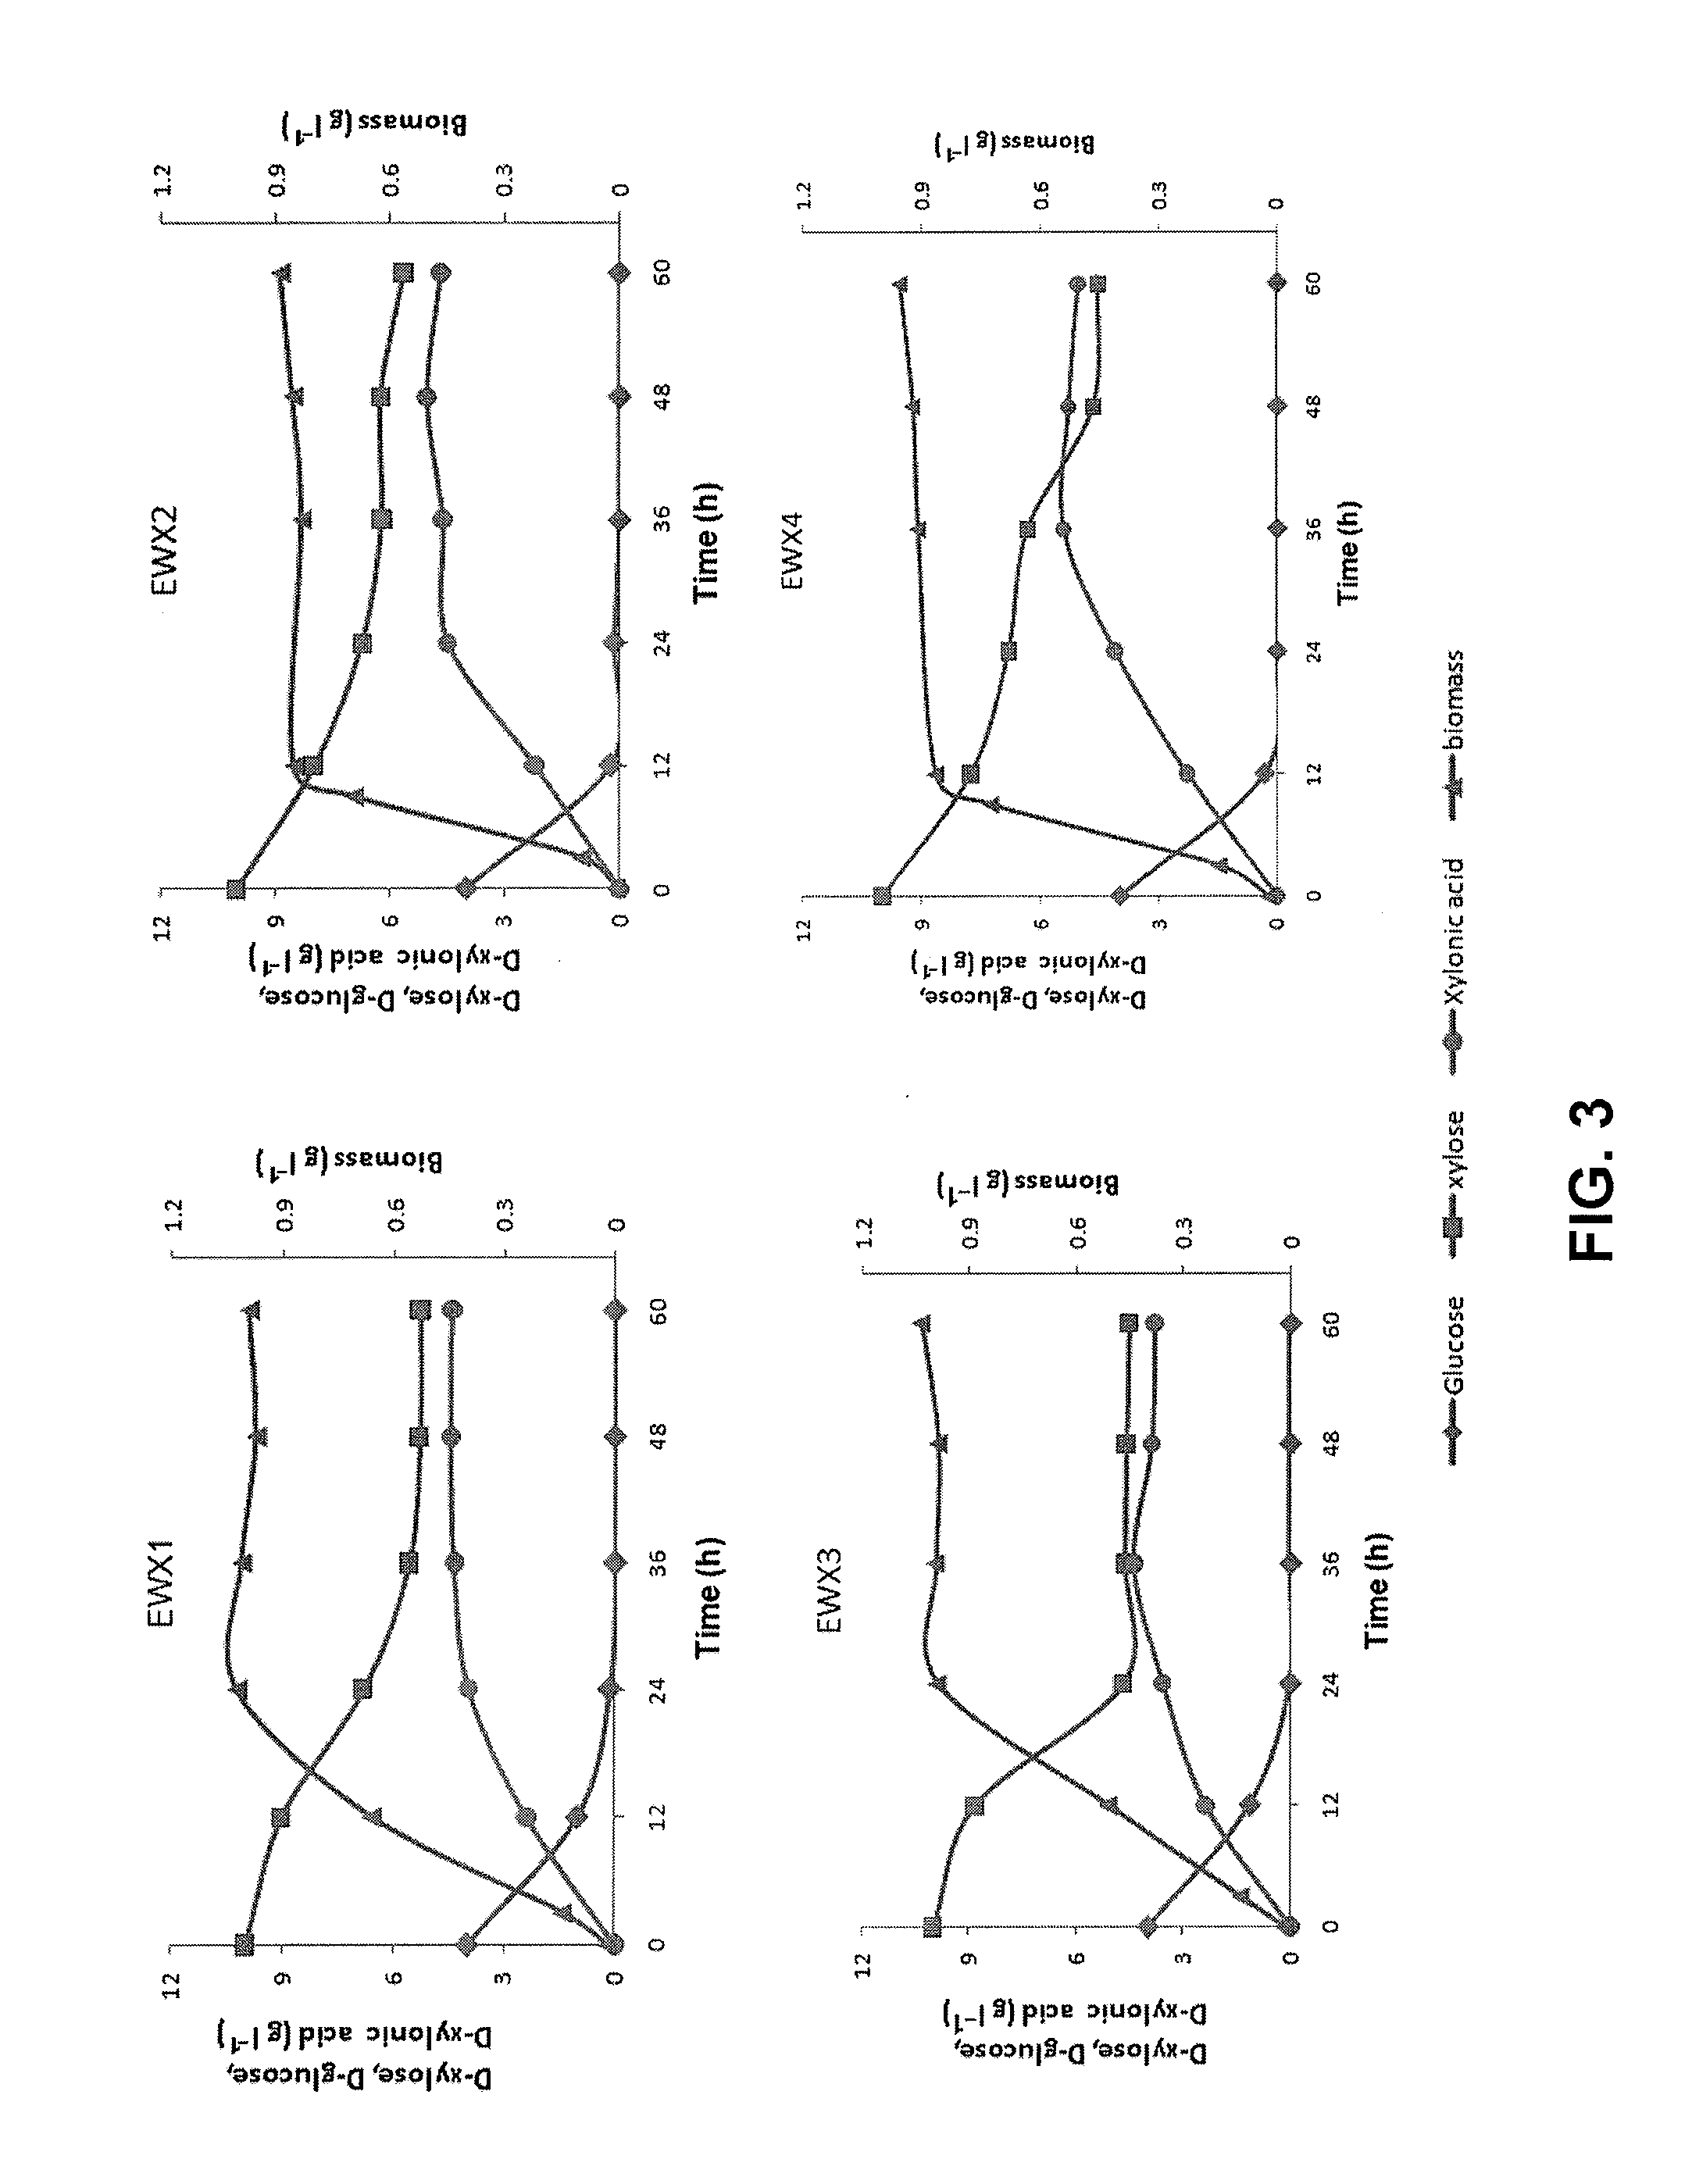 Recombinant Escherichia coli producing D-xylonic acid from D-xylose and method for producing D-xylonic acid using the same